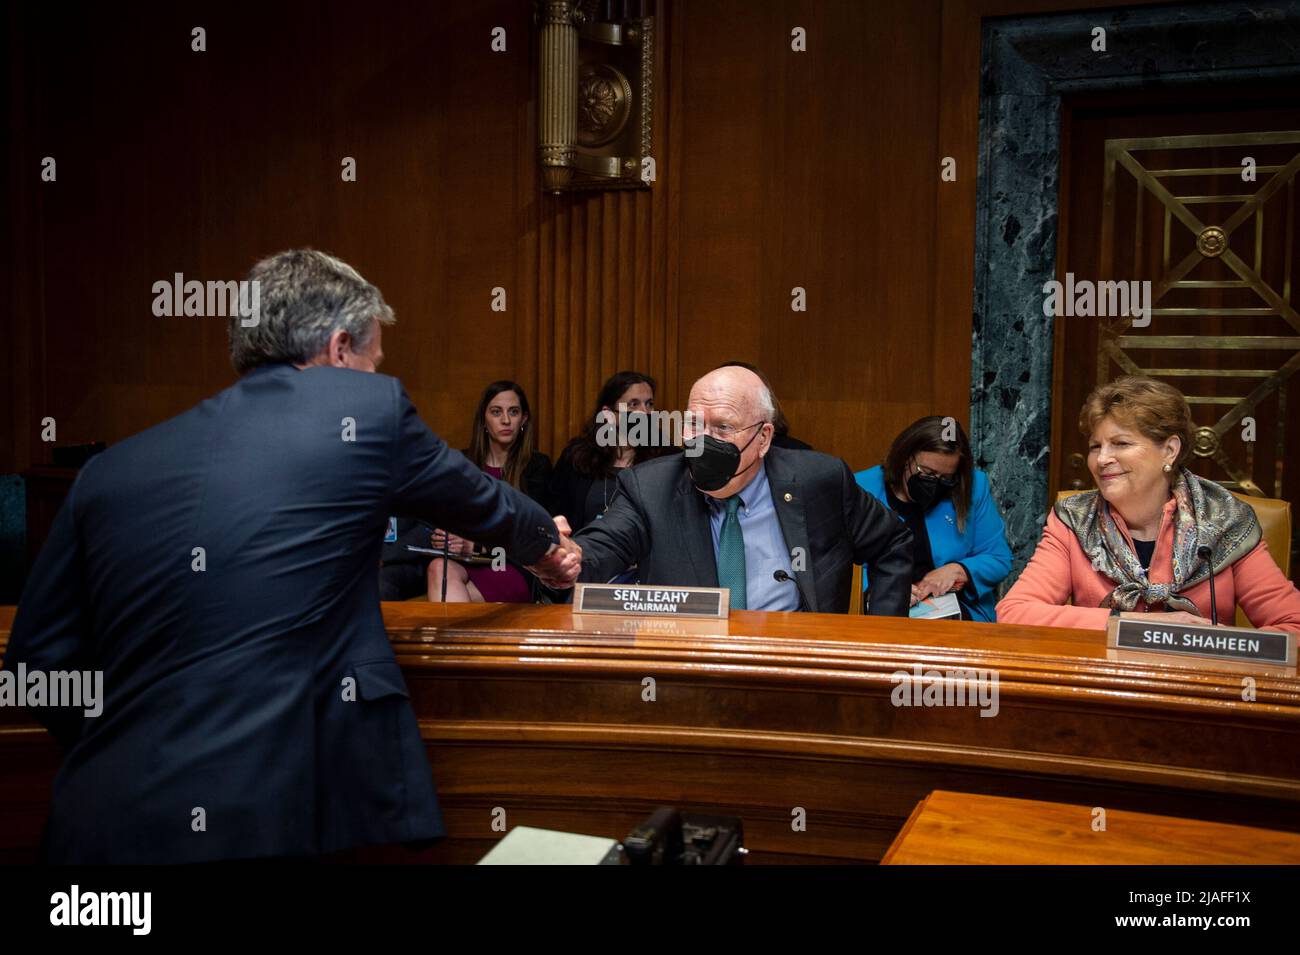 Federal Bureau of Investigation Director Christopher A. Wray, left, is greeted by United States Senator Patrick Leahy (Democrat of Vermont), Chairman, US Senate Committee on Appropriations, center, and United States Senator Jeanne Shaheen (Democrat of New Hampshire), right, as he arrives for a Senate Appropriations - Subcommittee on Commerce, Justice, Science, and Related Agencies hearing to examine proposed budget estimates and justification for fiscal year 2023 for the Federal Bureau of Investigation in the Dirksen Senate Office Building in Washington, DC, Wednesday, May 25, 2022. Credit: Ro Stock Photo